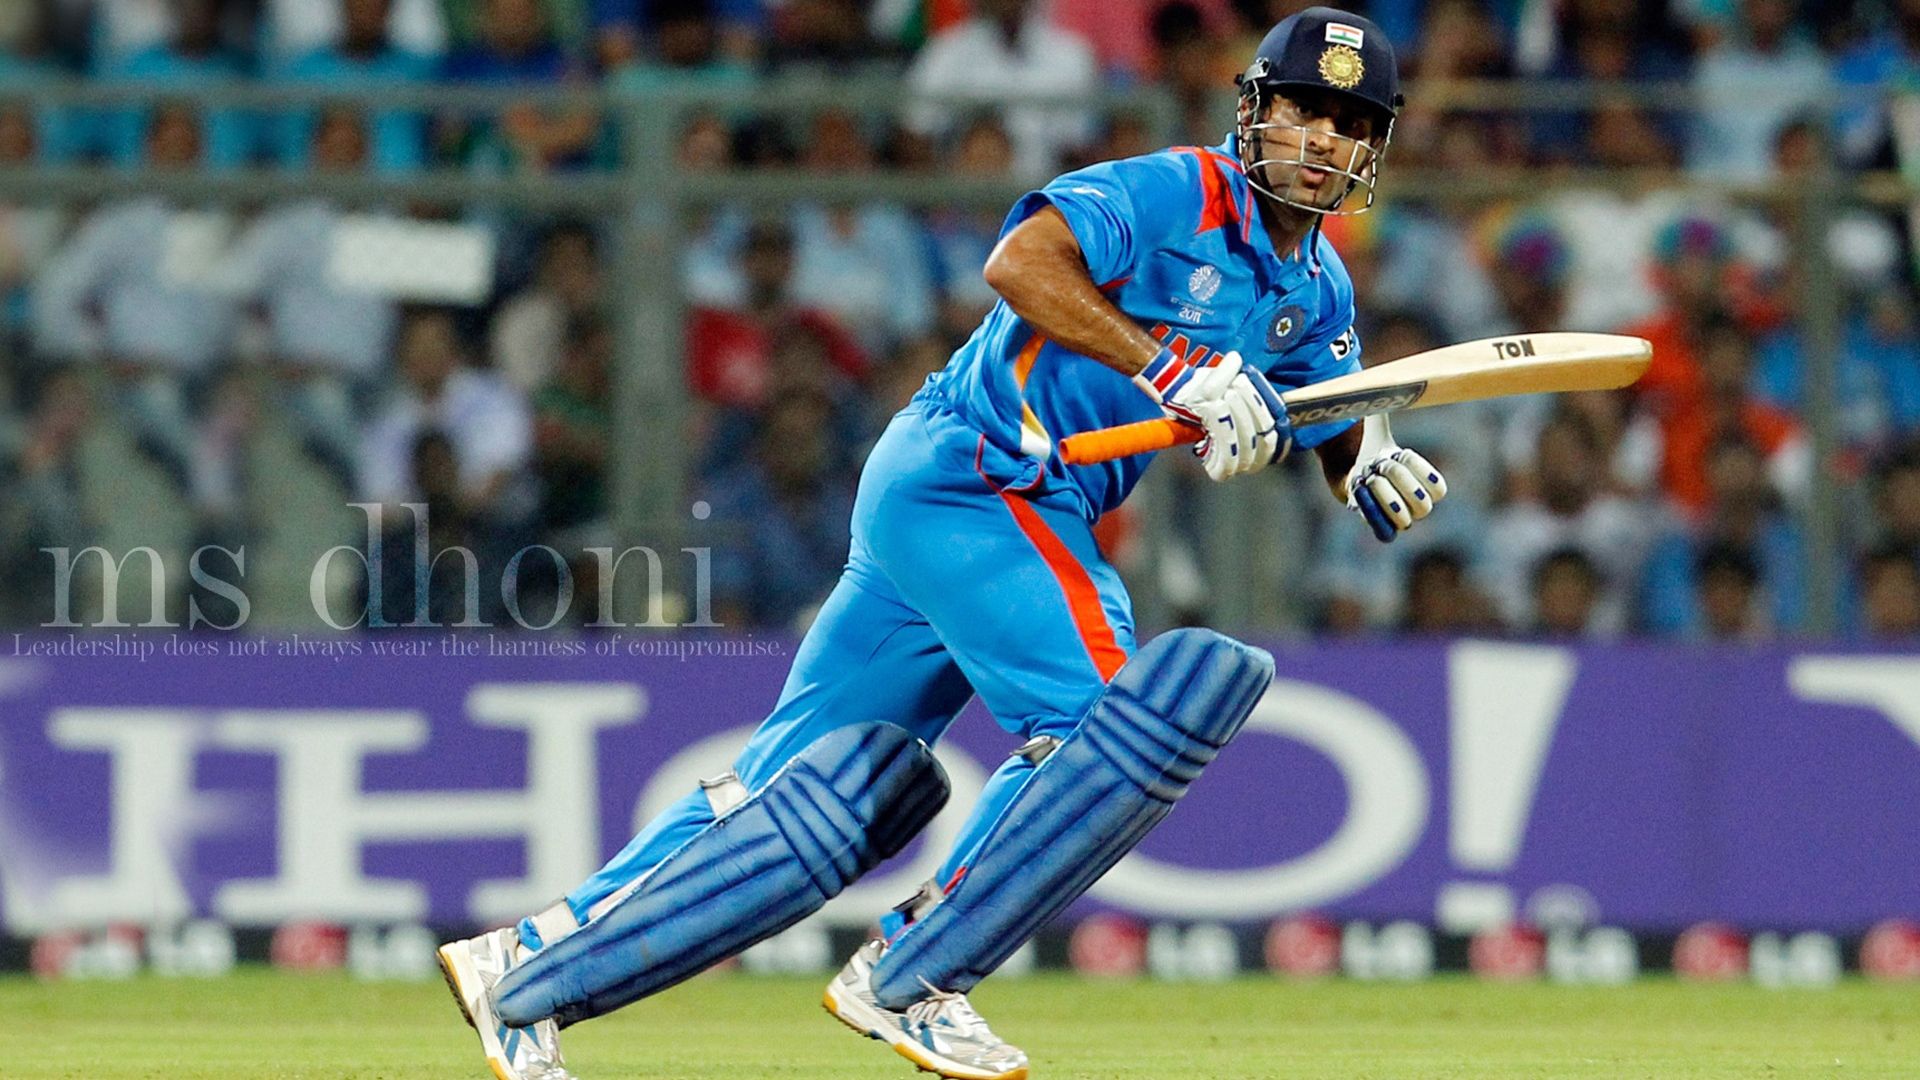 dhoni 4K wallpapers for your desktop or mobile screen free and